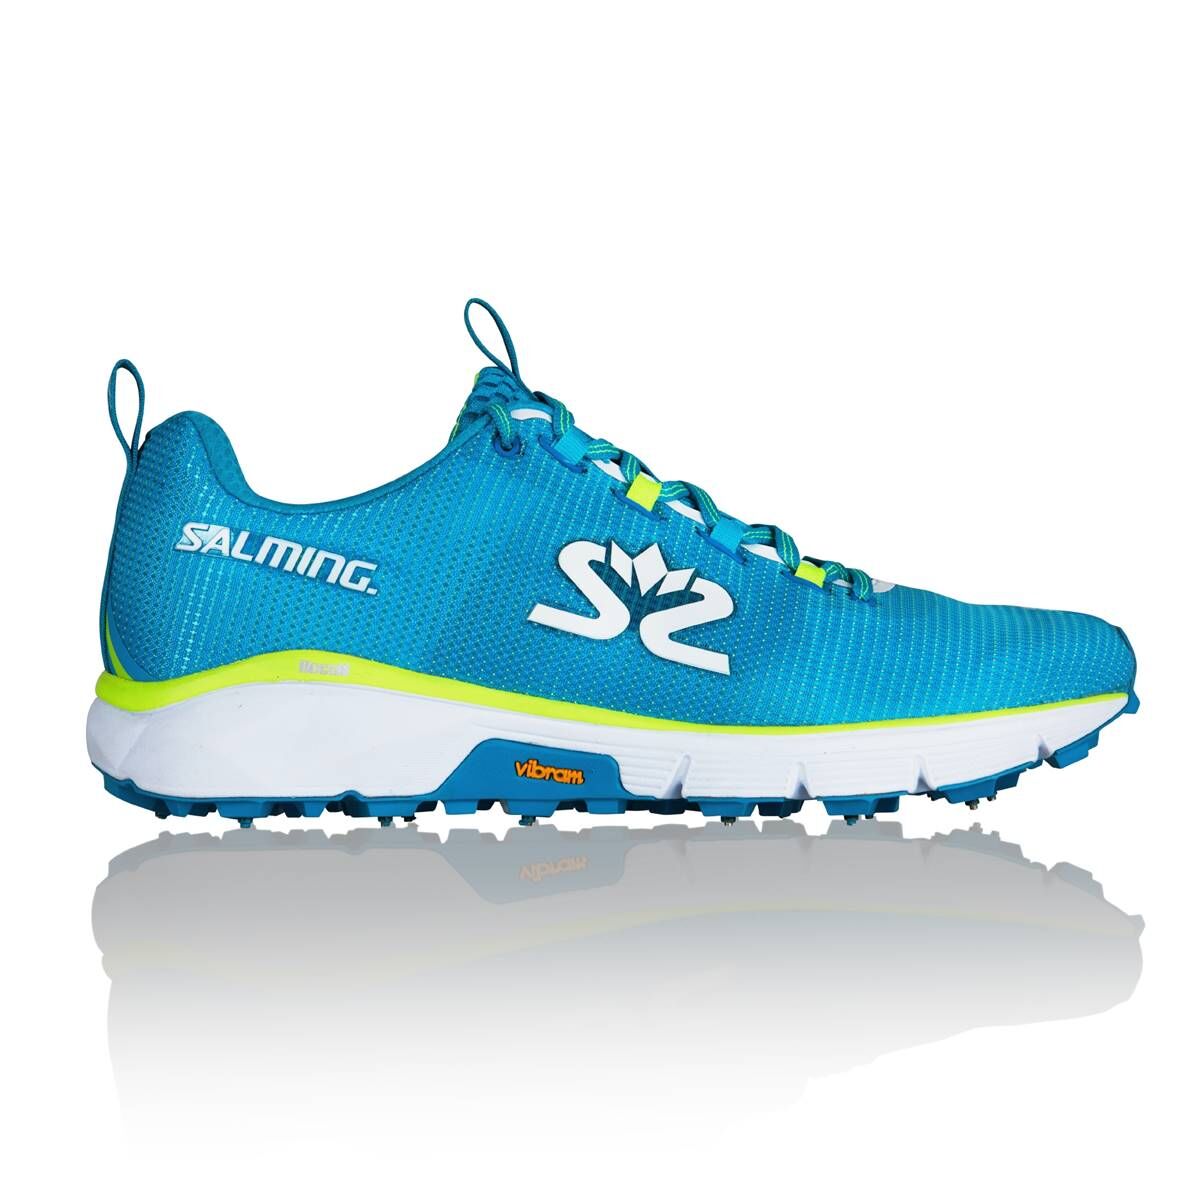 Salming Ispike - Trail running shoes - Men's